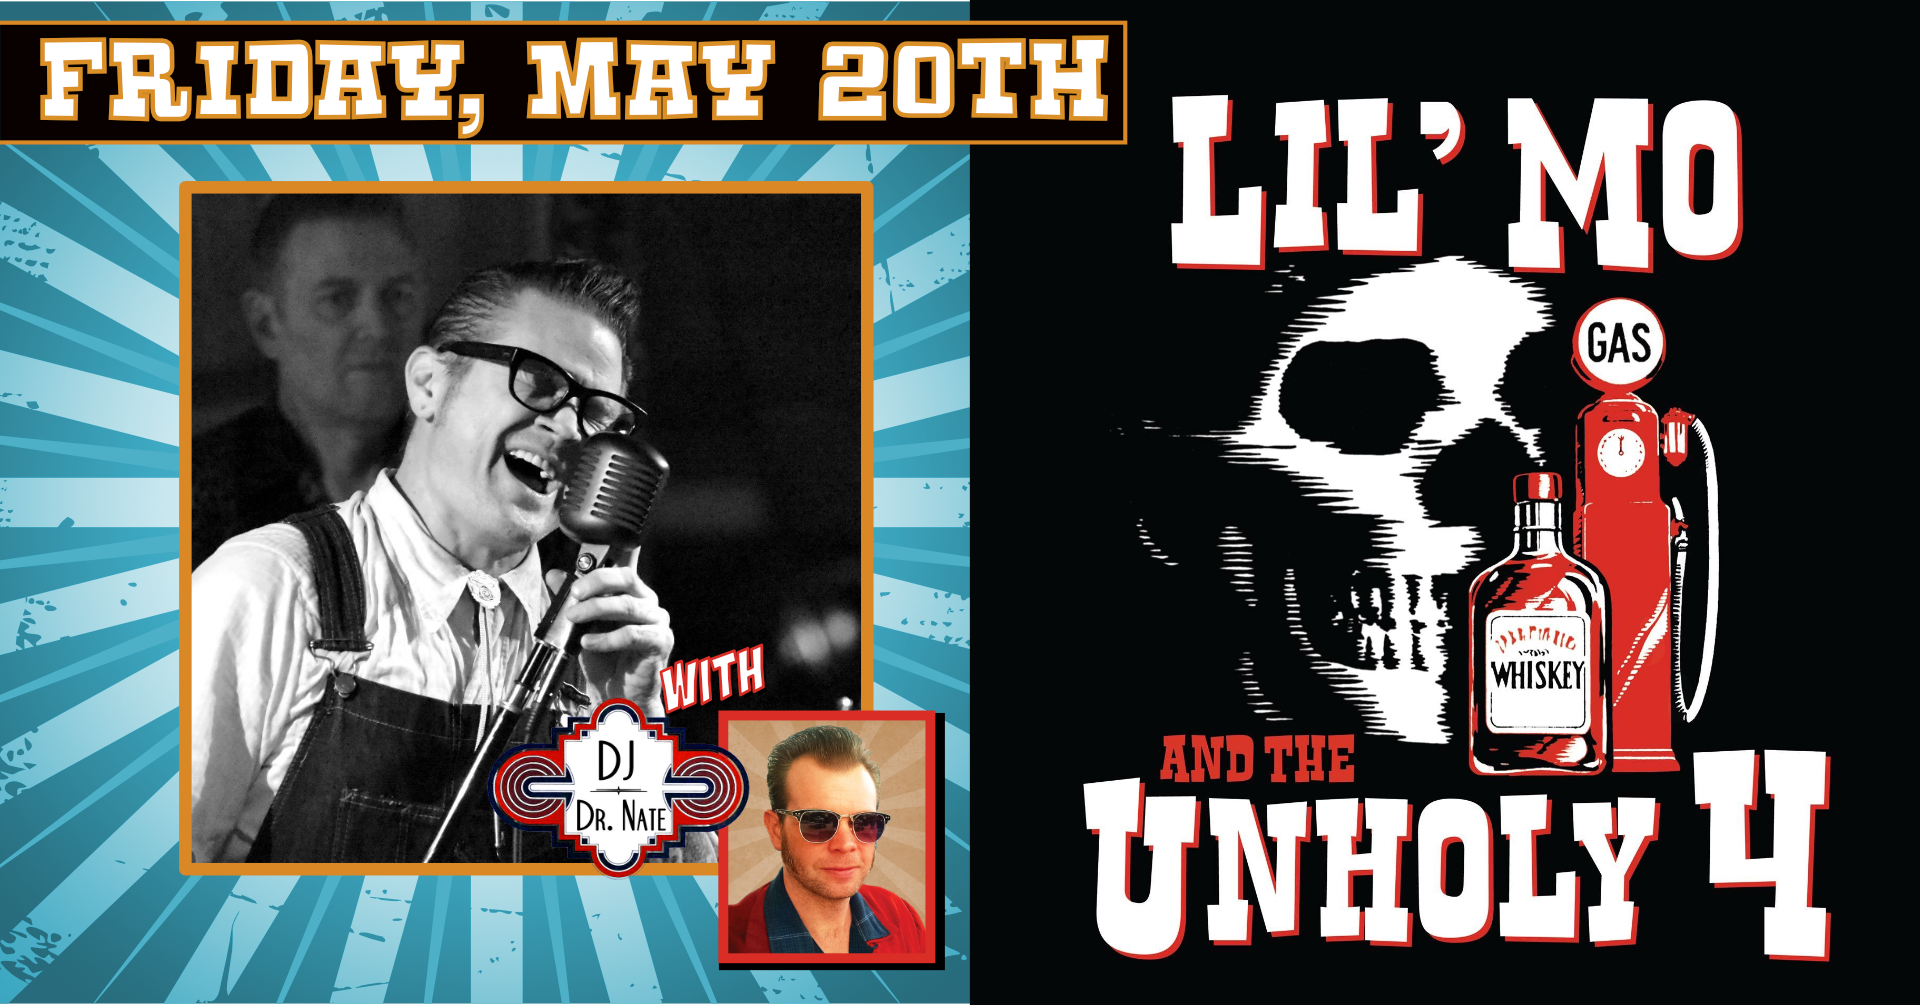 LIL’ MO and THE UNHOLY 4 with DJ DR NATE!